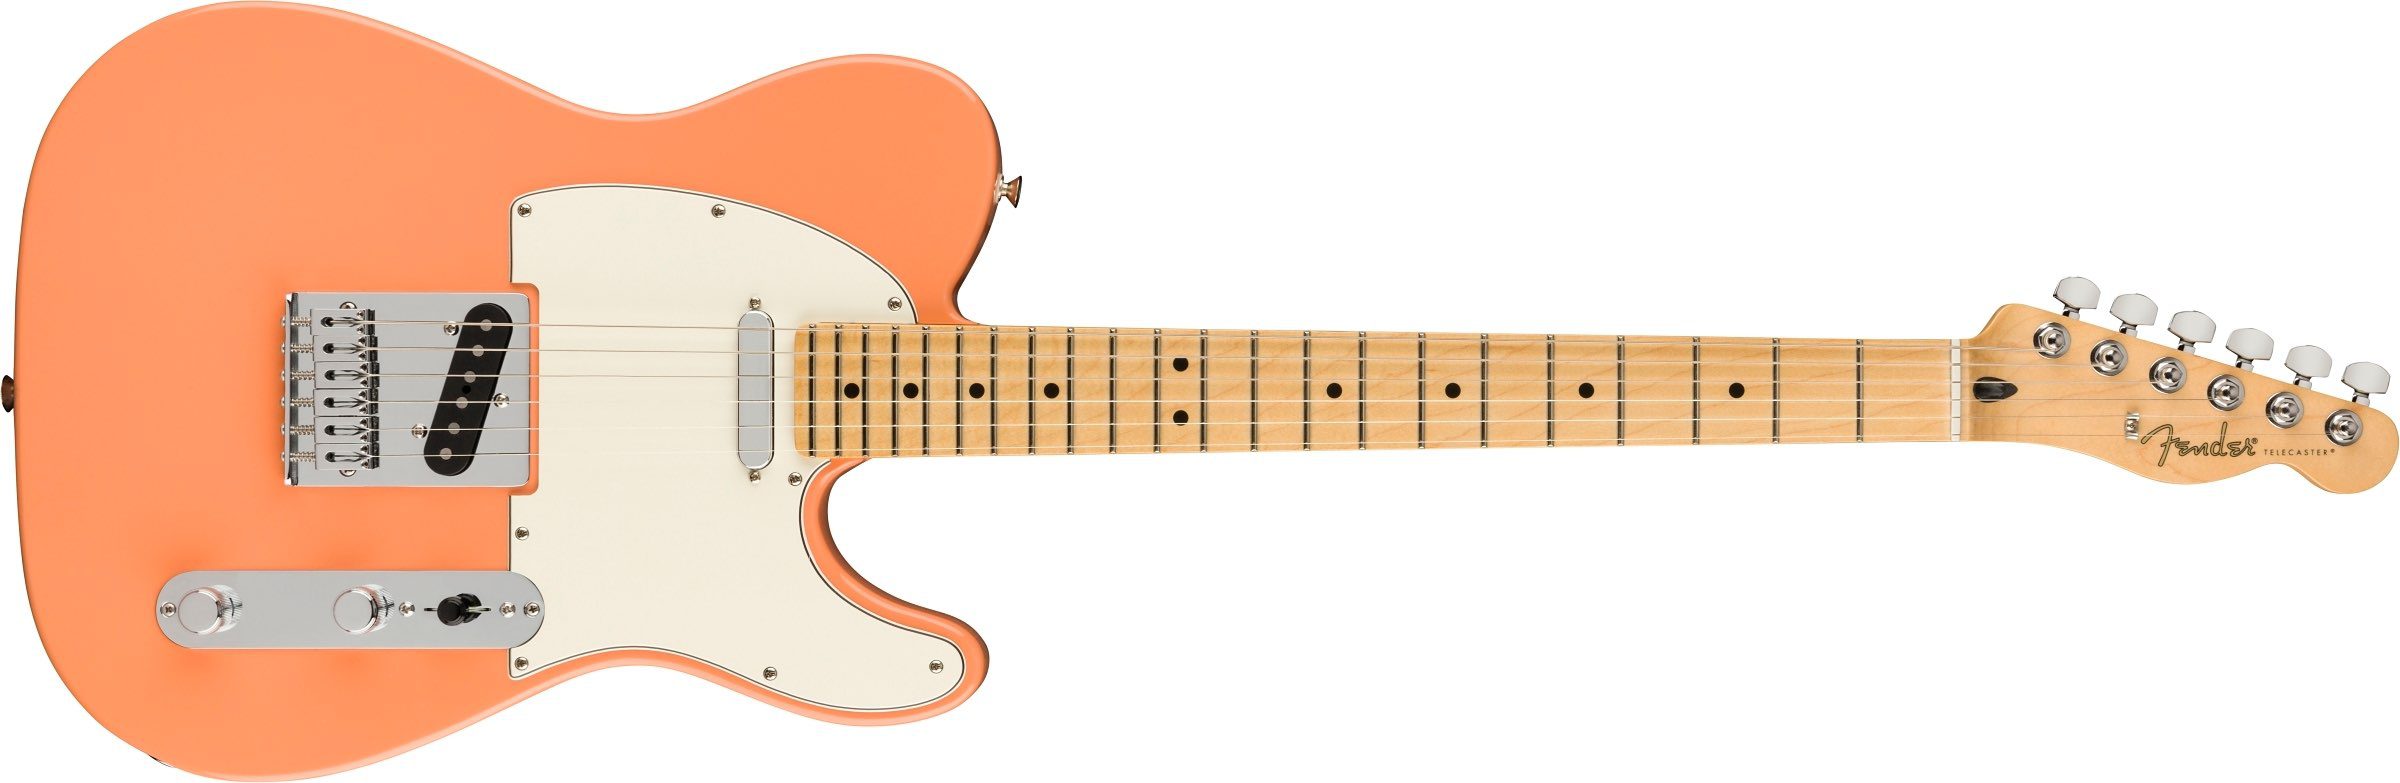 Fender Pacific Peach Player Series Telecaster